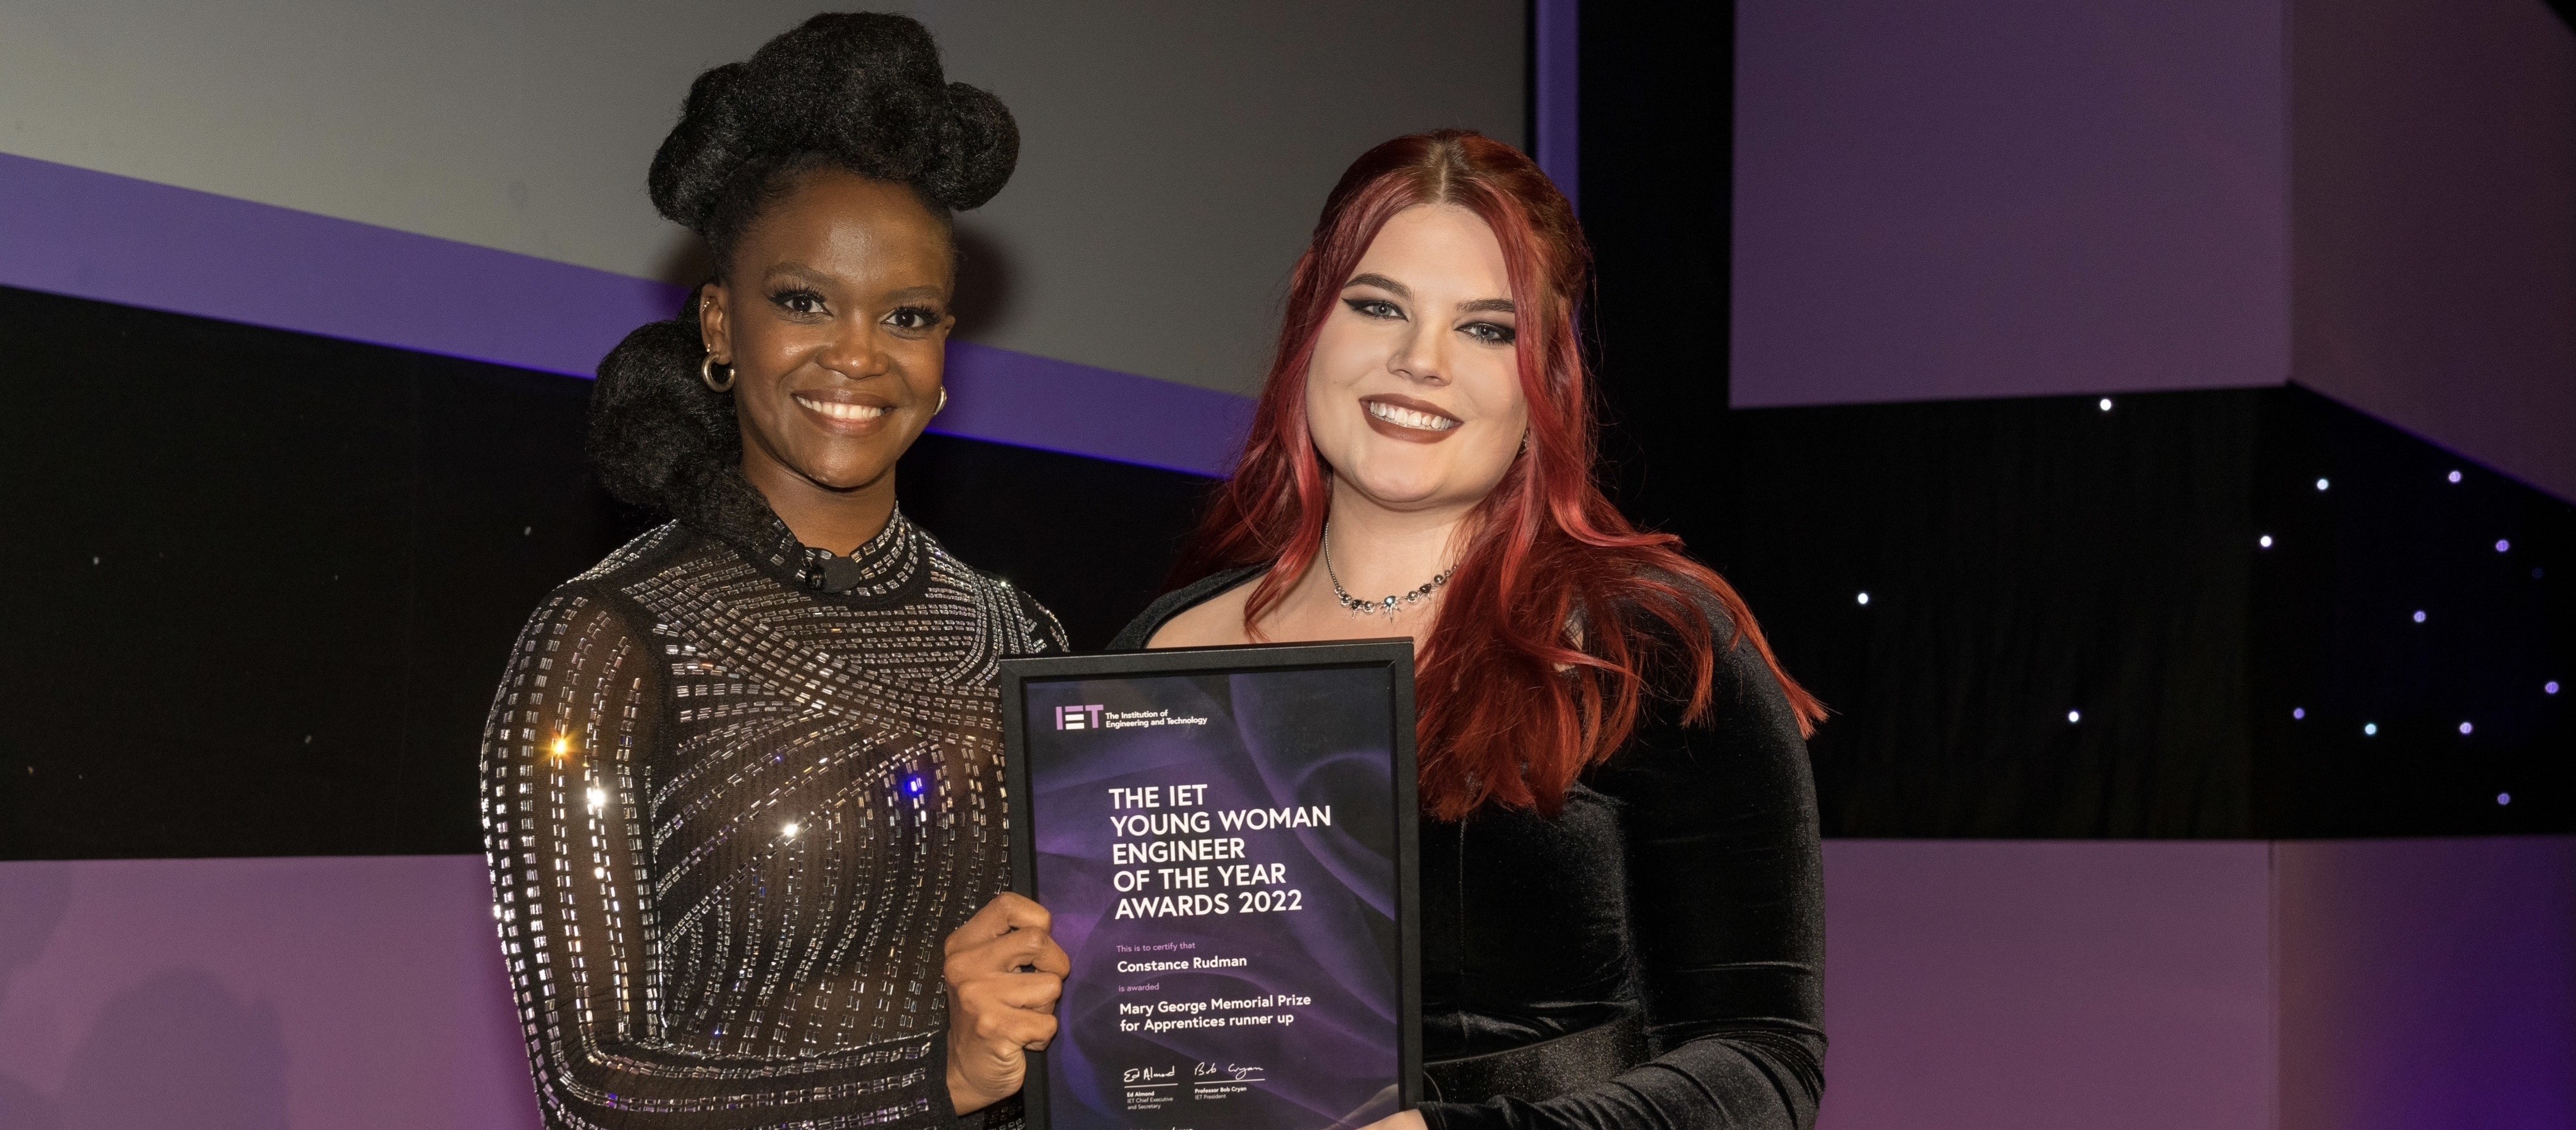 Connie and Oti Mabuse at the IET's Young Woman Engineer of the Year Awards 2022